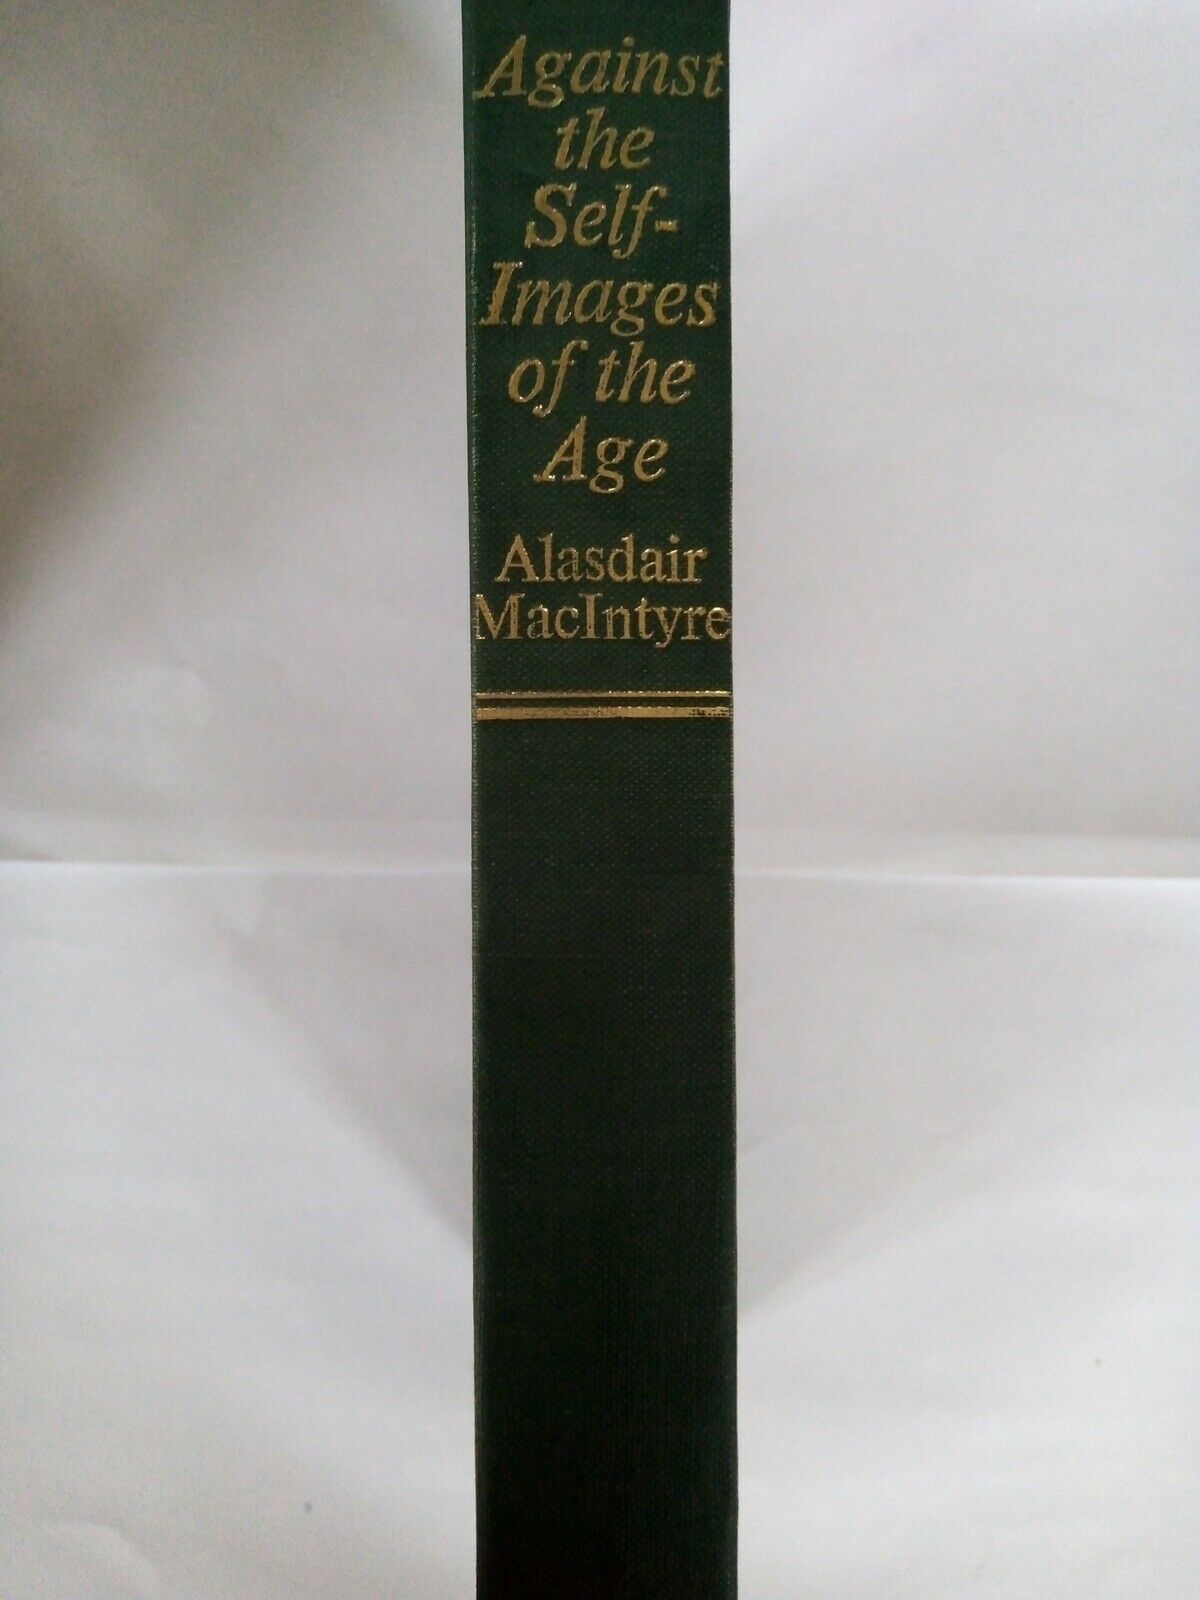 Against the Self — Images of the Age, Alasdair MacIntyre,